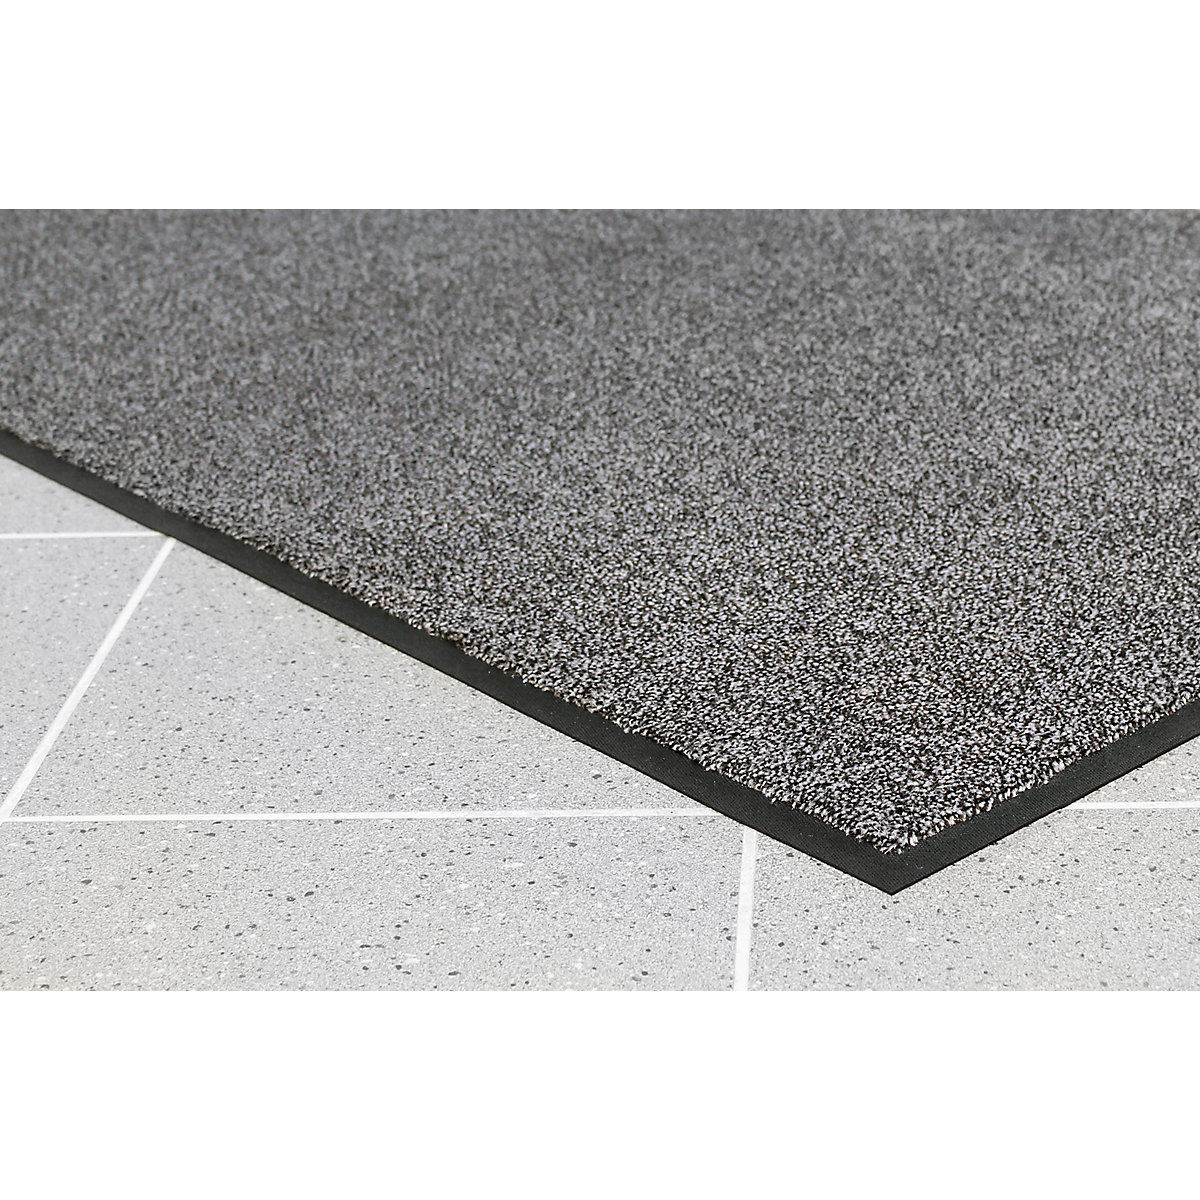 Entrance matting for indoor use, nylon pile, LxW 850 x 600 mm, pack of 2, charcoal